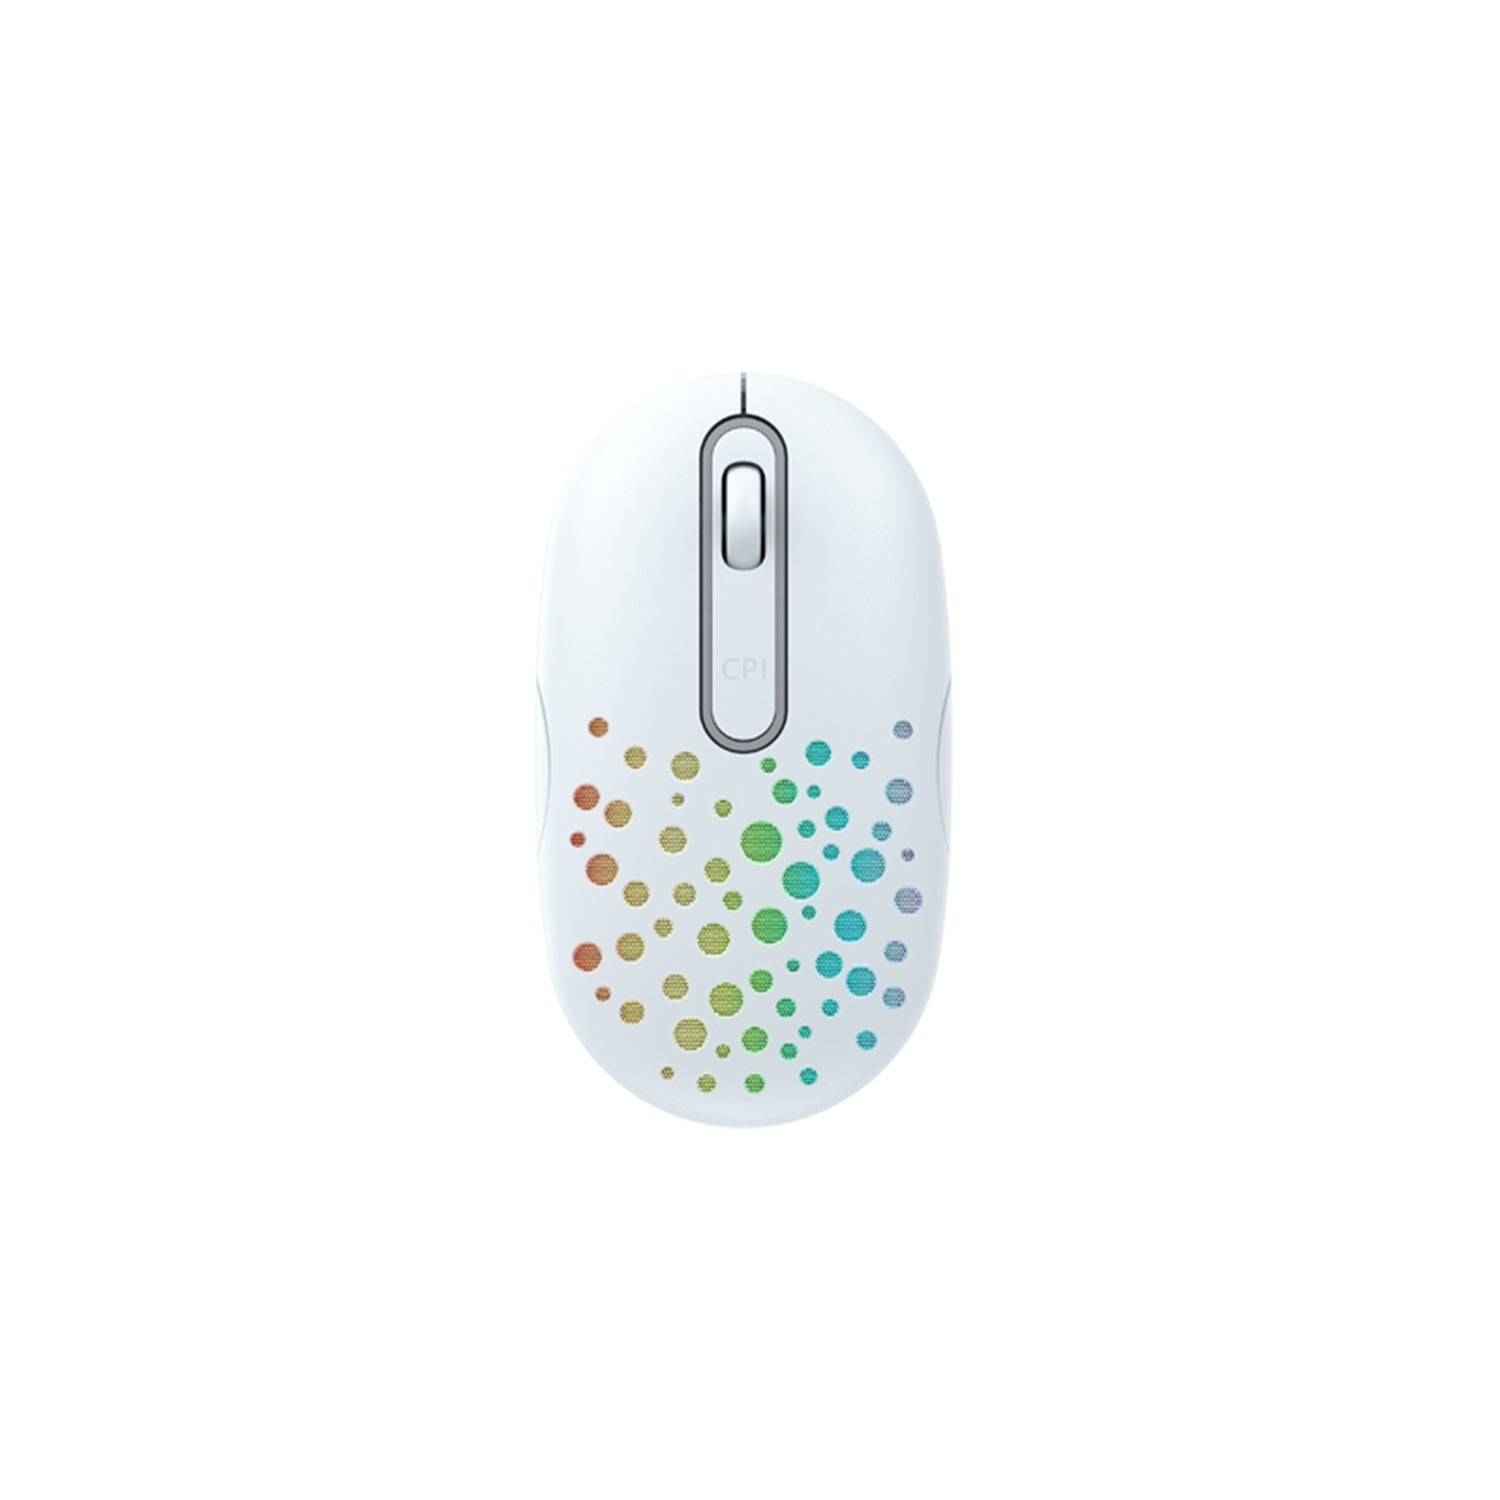 HAVIT MS64GT 2.4G Portable USB Wireless Mouse for Windows Mac PC Notebook